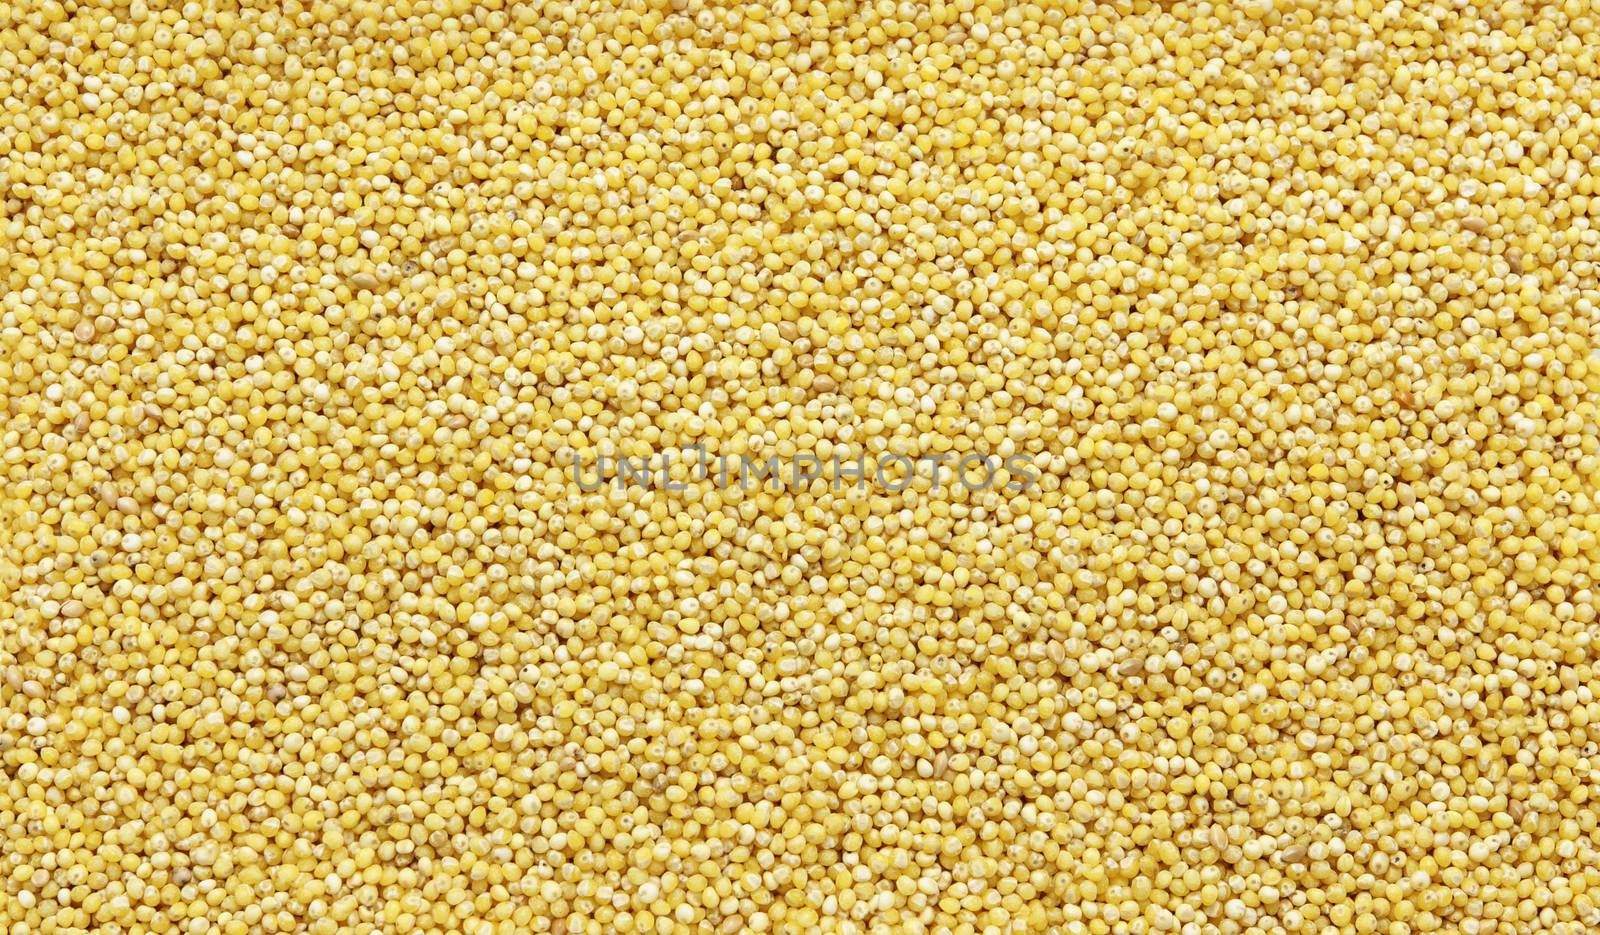 Polished millet -texture and details - traditional food, closeup